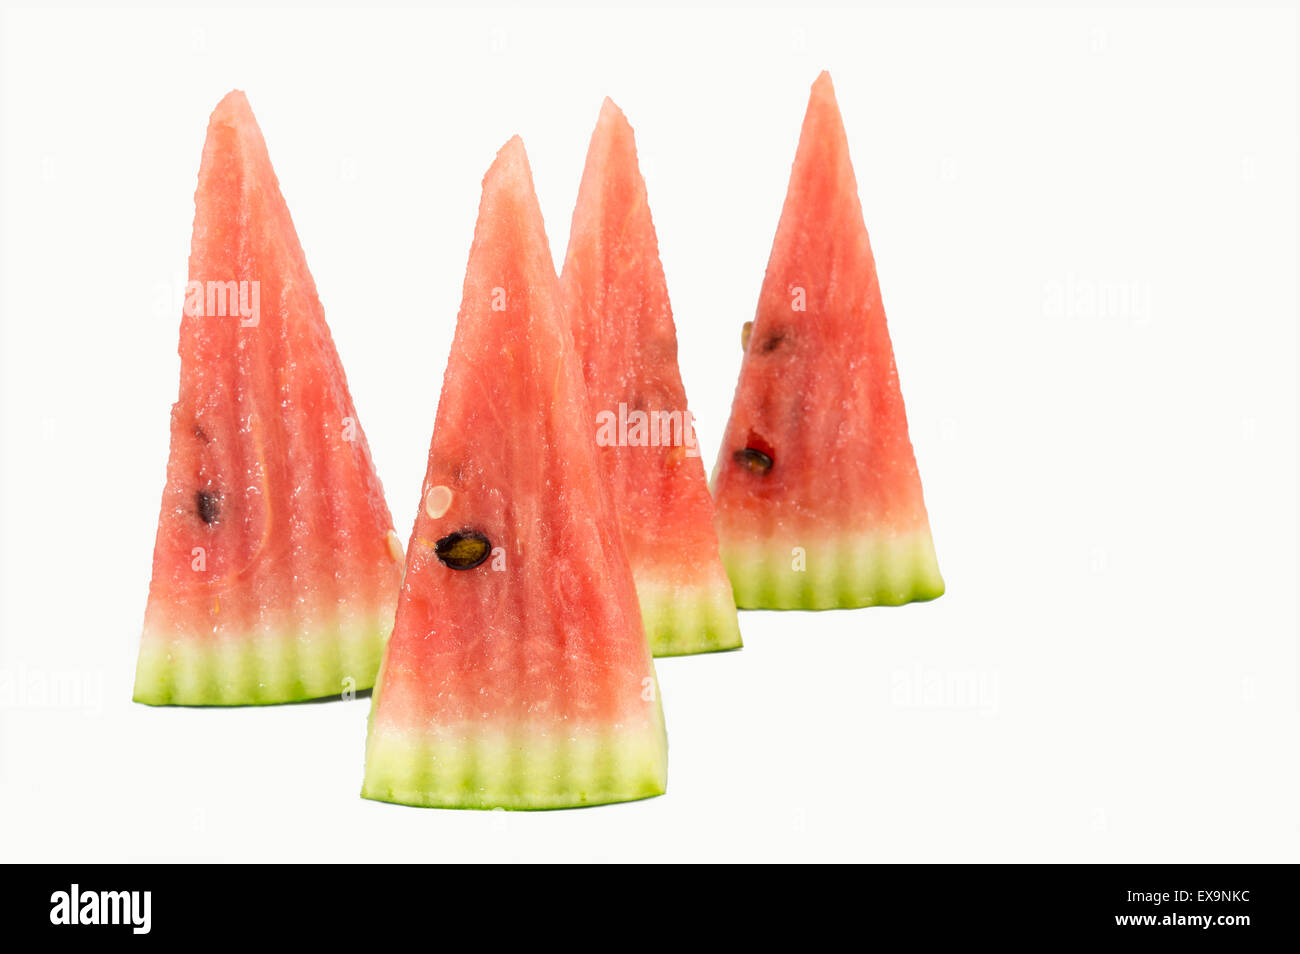 Conical fresh watermelon slices isolated on white background Stock Photo